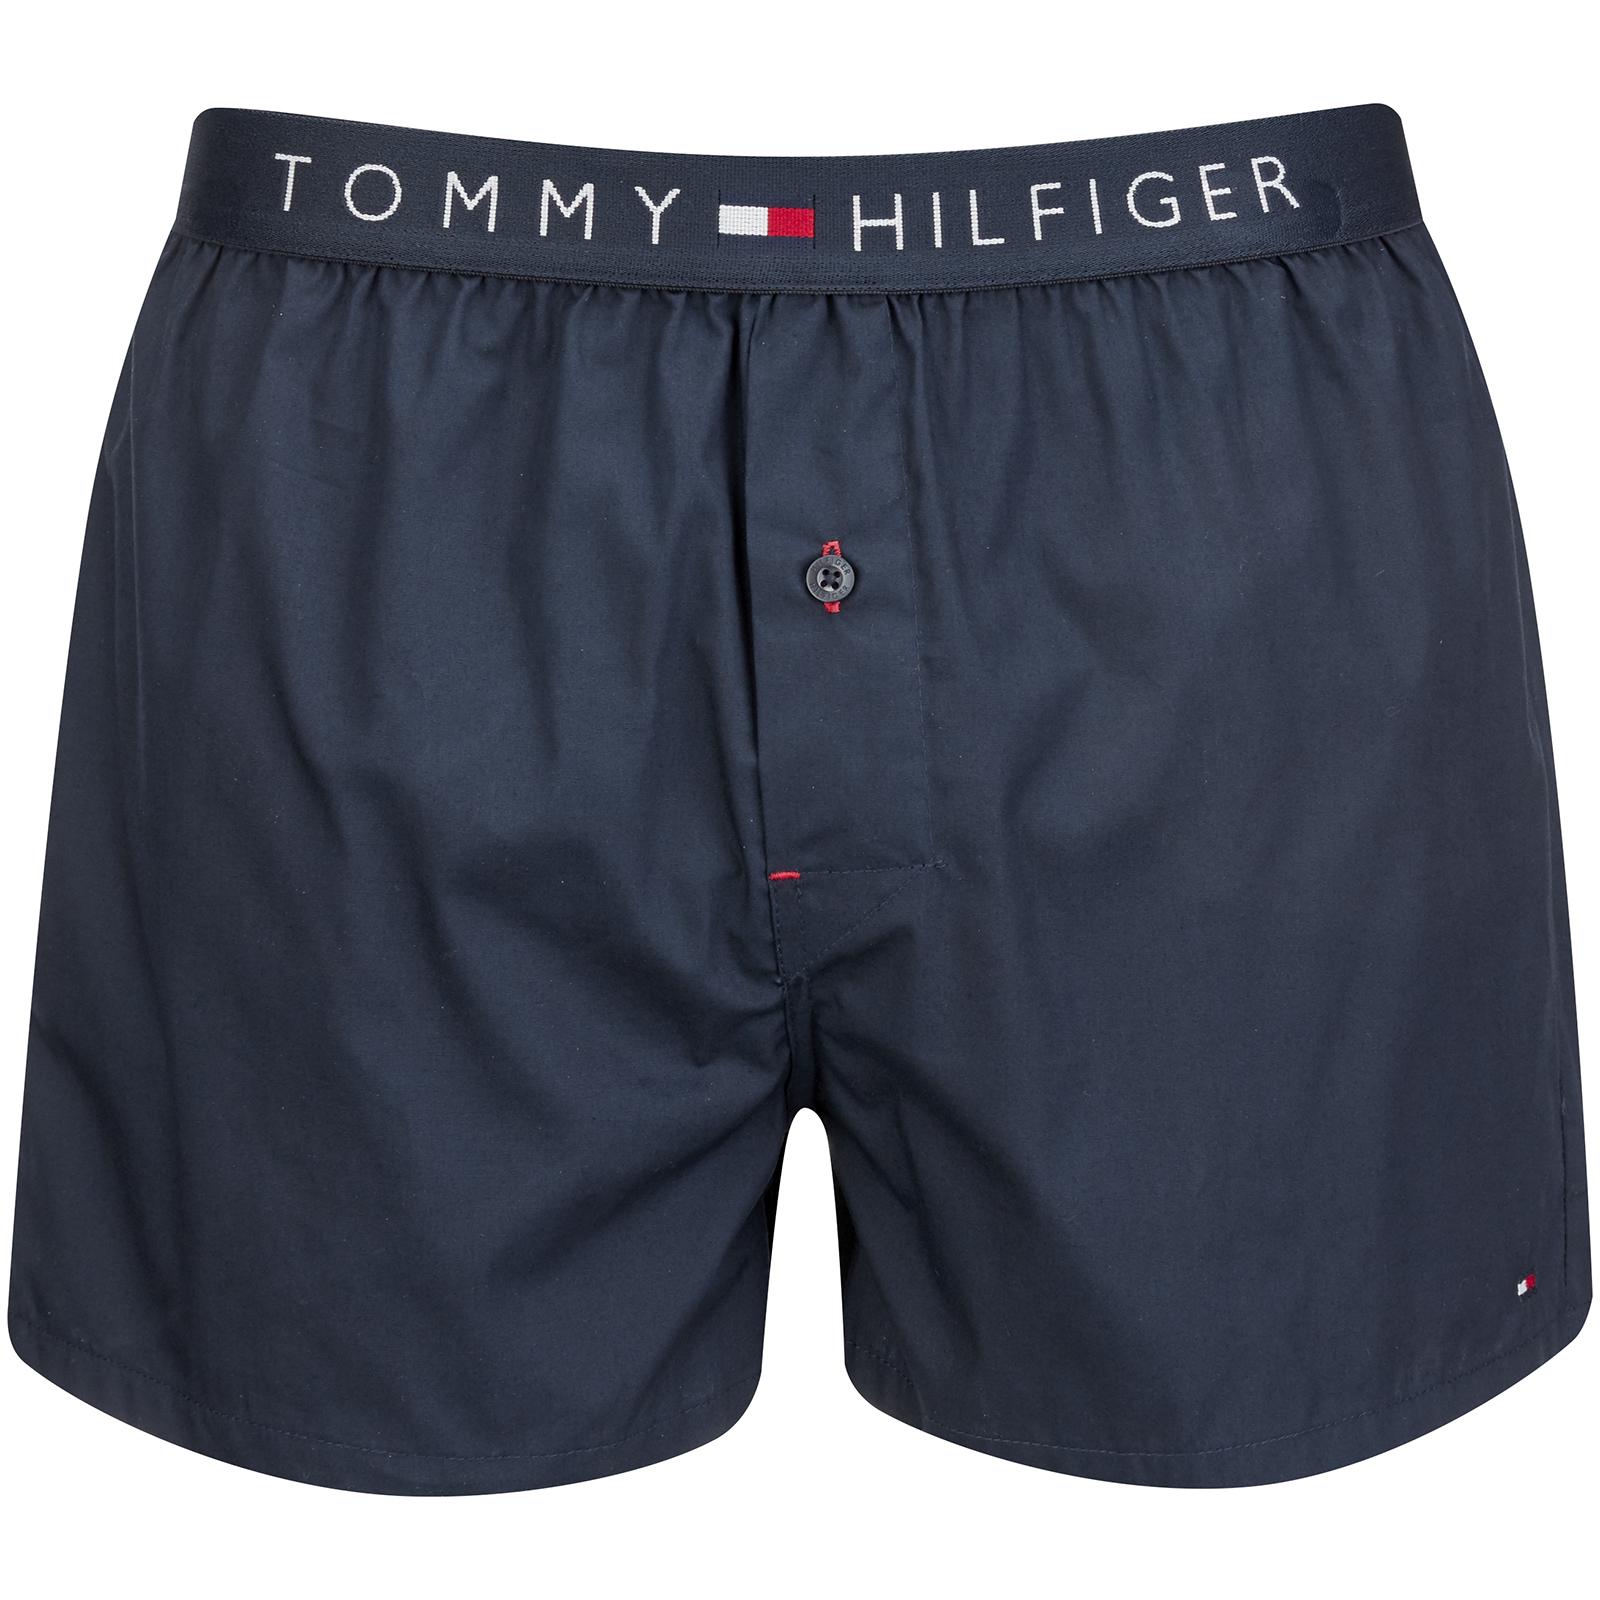 Tommy Hilfiger Woven Boxer Shorts Top Sellers, 58% OFF |  www.ingeniovirtual.com